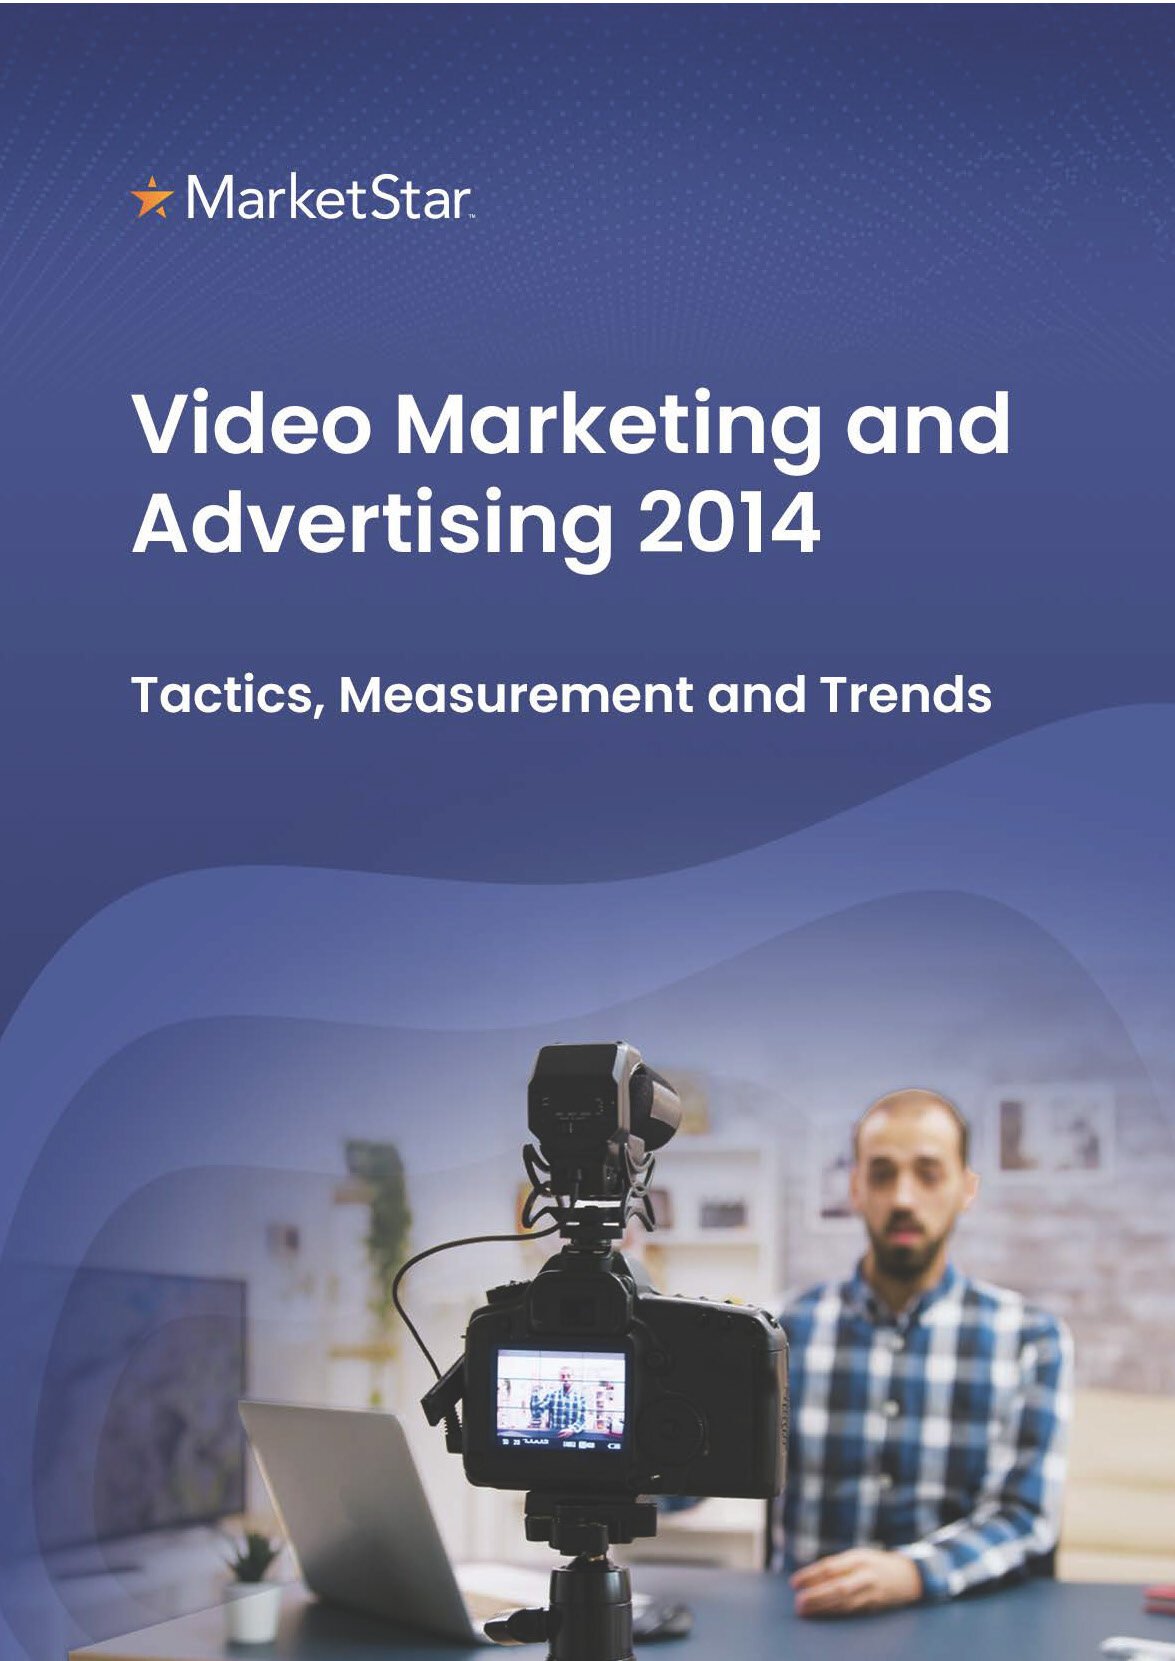 Video Marketing and Advertising 2014: Tactics, Measurement and Trends